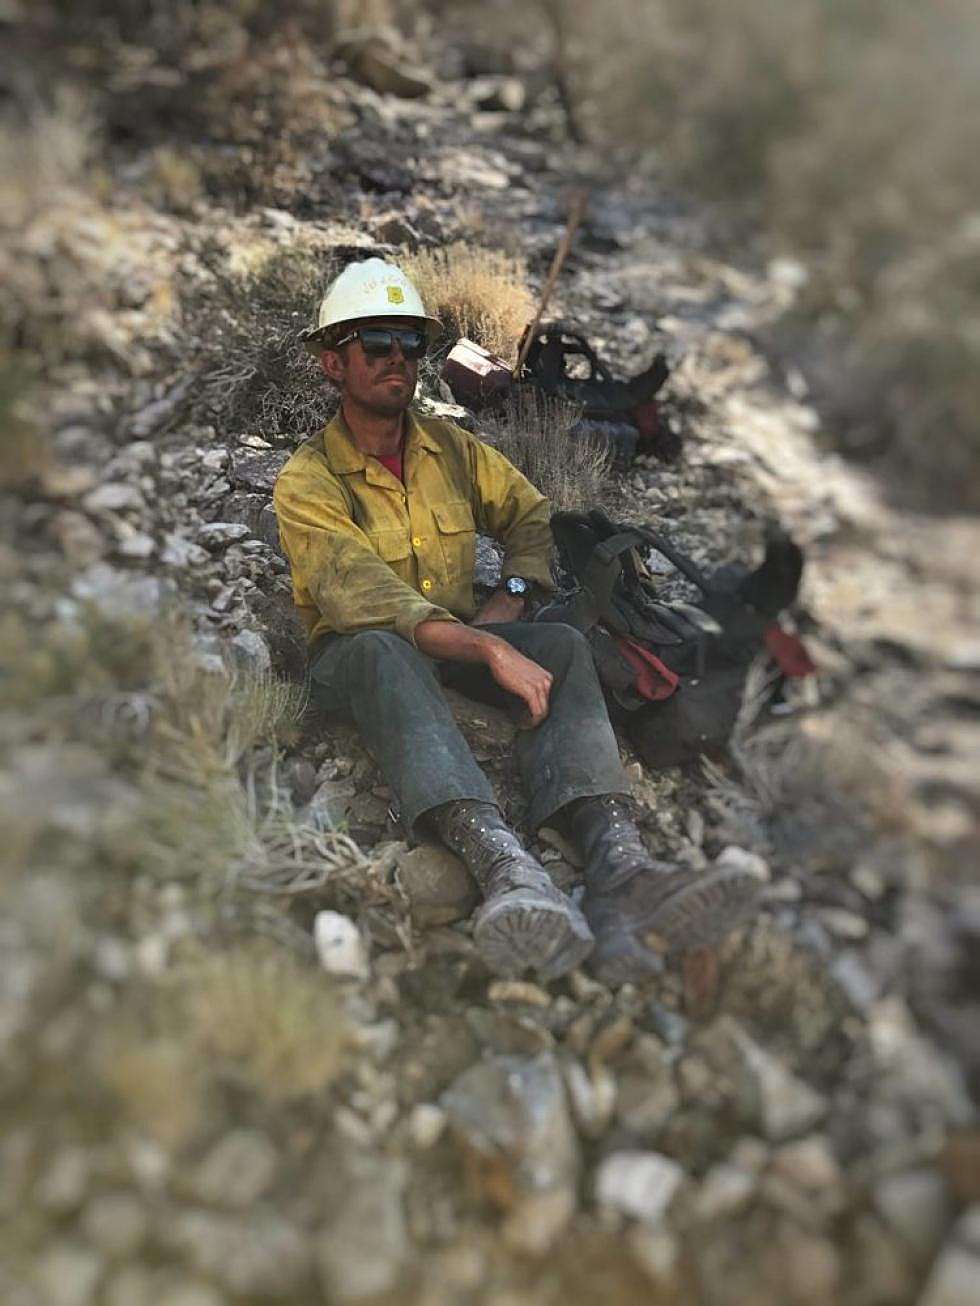 UPDATED: California firefighter identified as victim in fatal accident on Lolo Peak fire